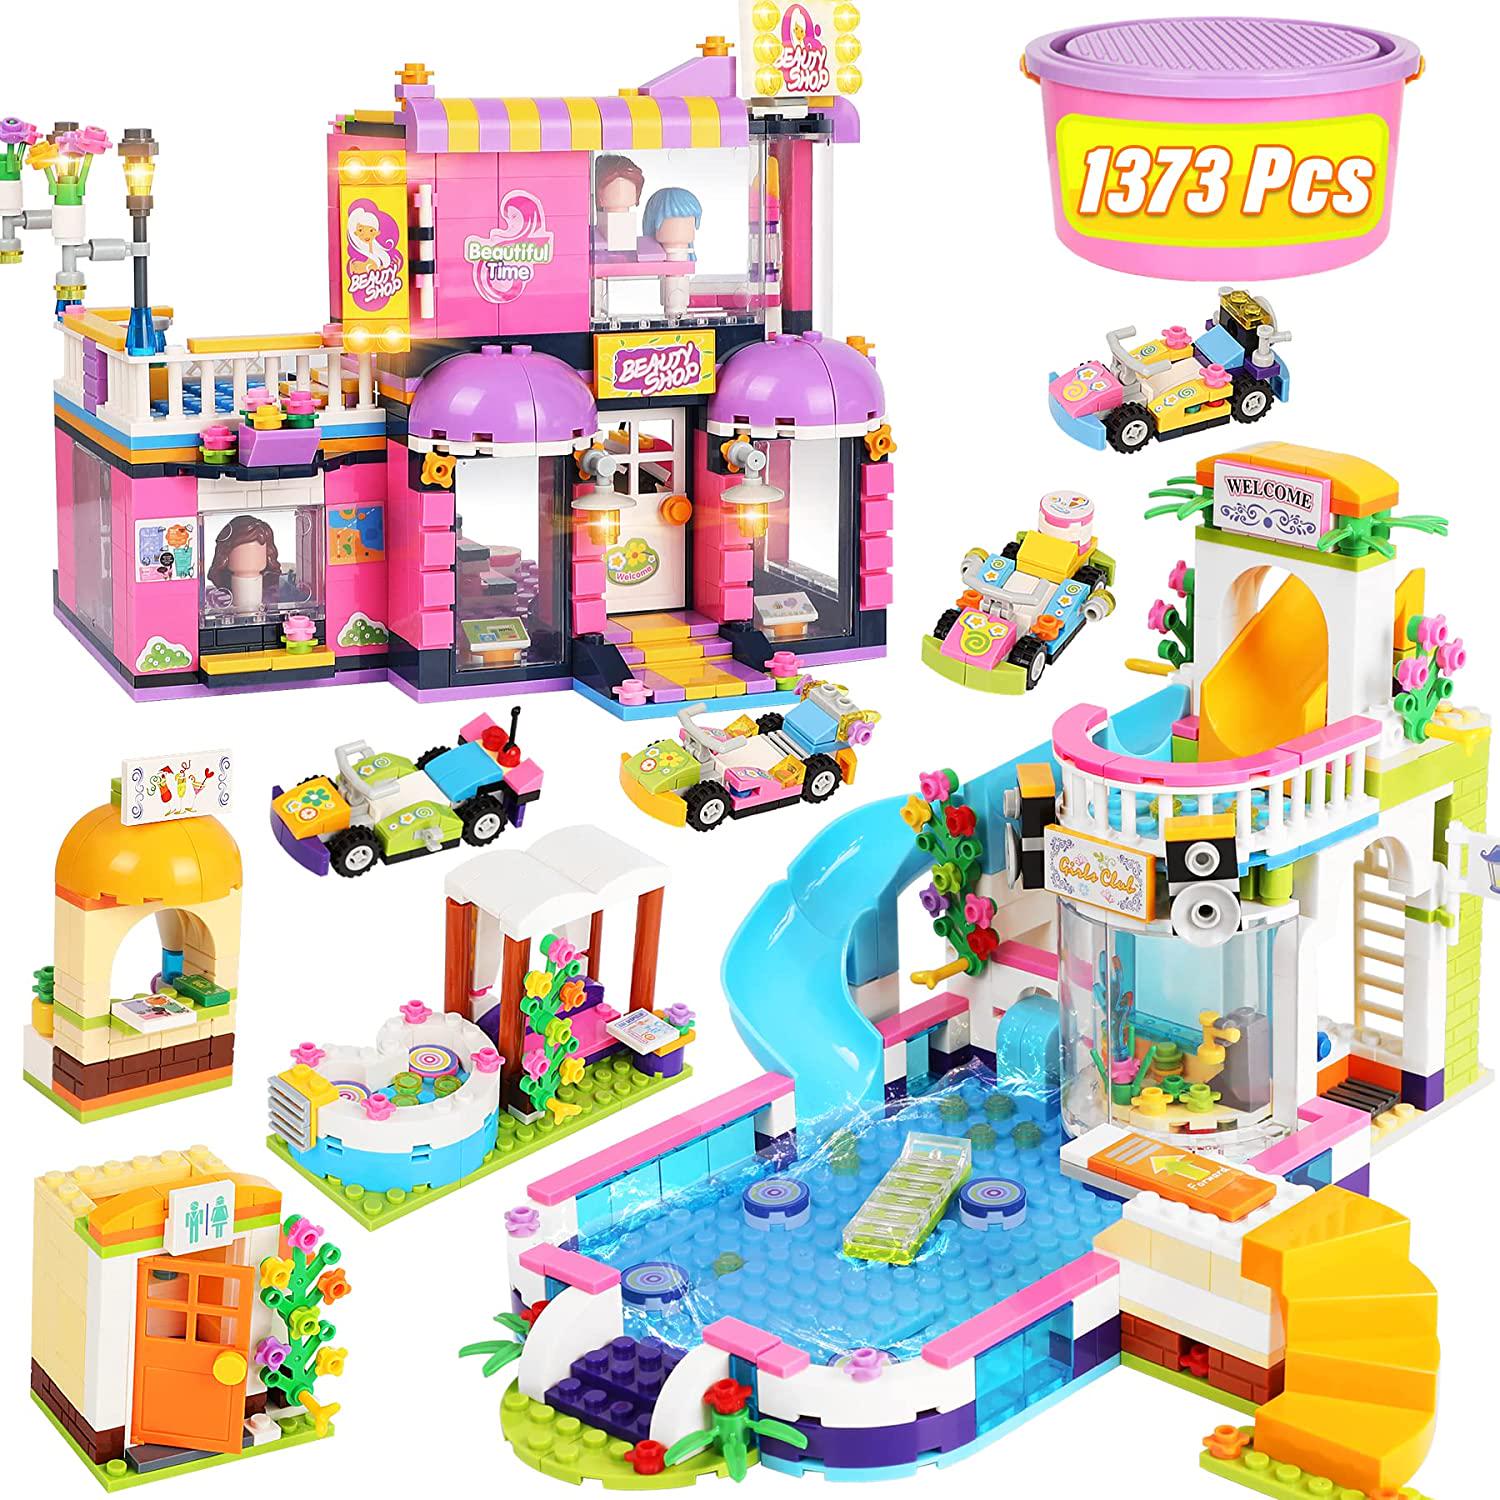 EP EXERCISE N PLAY, Friends Summer Pool Party Toy Pool Building Set for Girls 6-12, 1373 Pieces Hair Salon Creative Building Bricks Blocks Kit, STEM Learning and Roleplay Gift Pretend Play for Girl and Boy w/ Storage Box